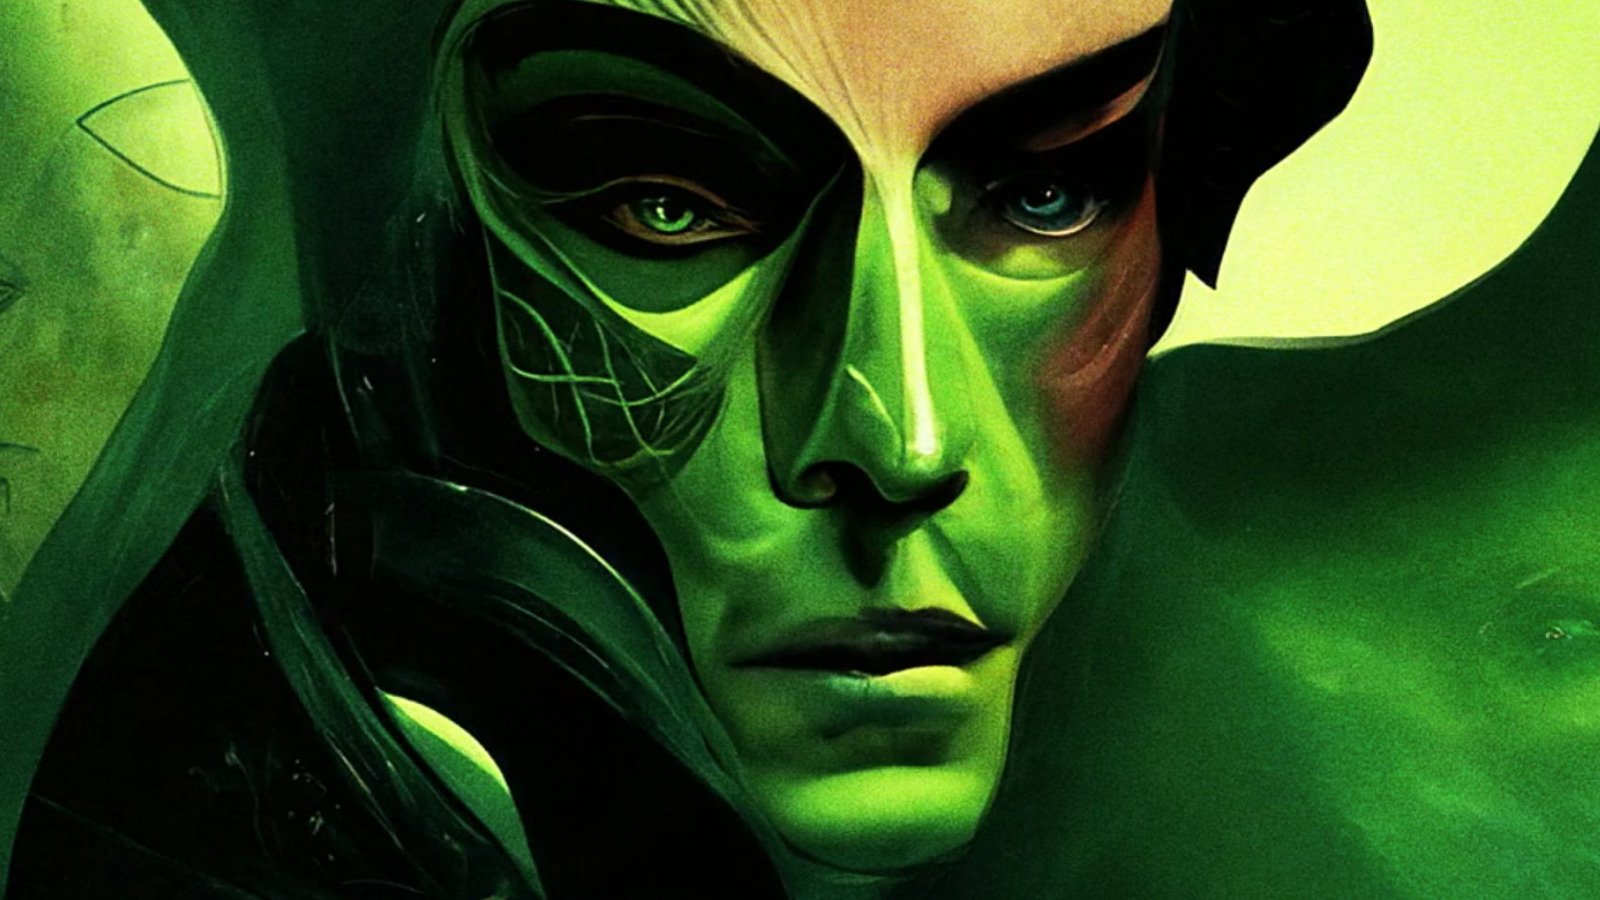 Secret Invasion Episode 1 Ending Explained: Is THAT Character Really Dead?!